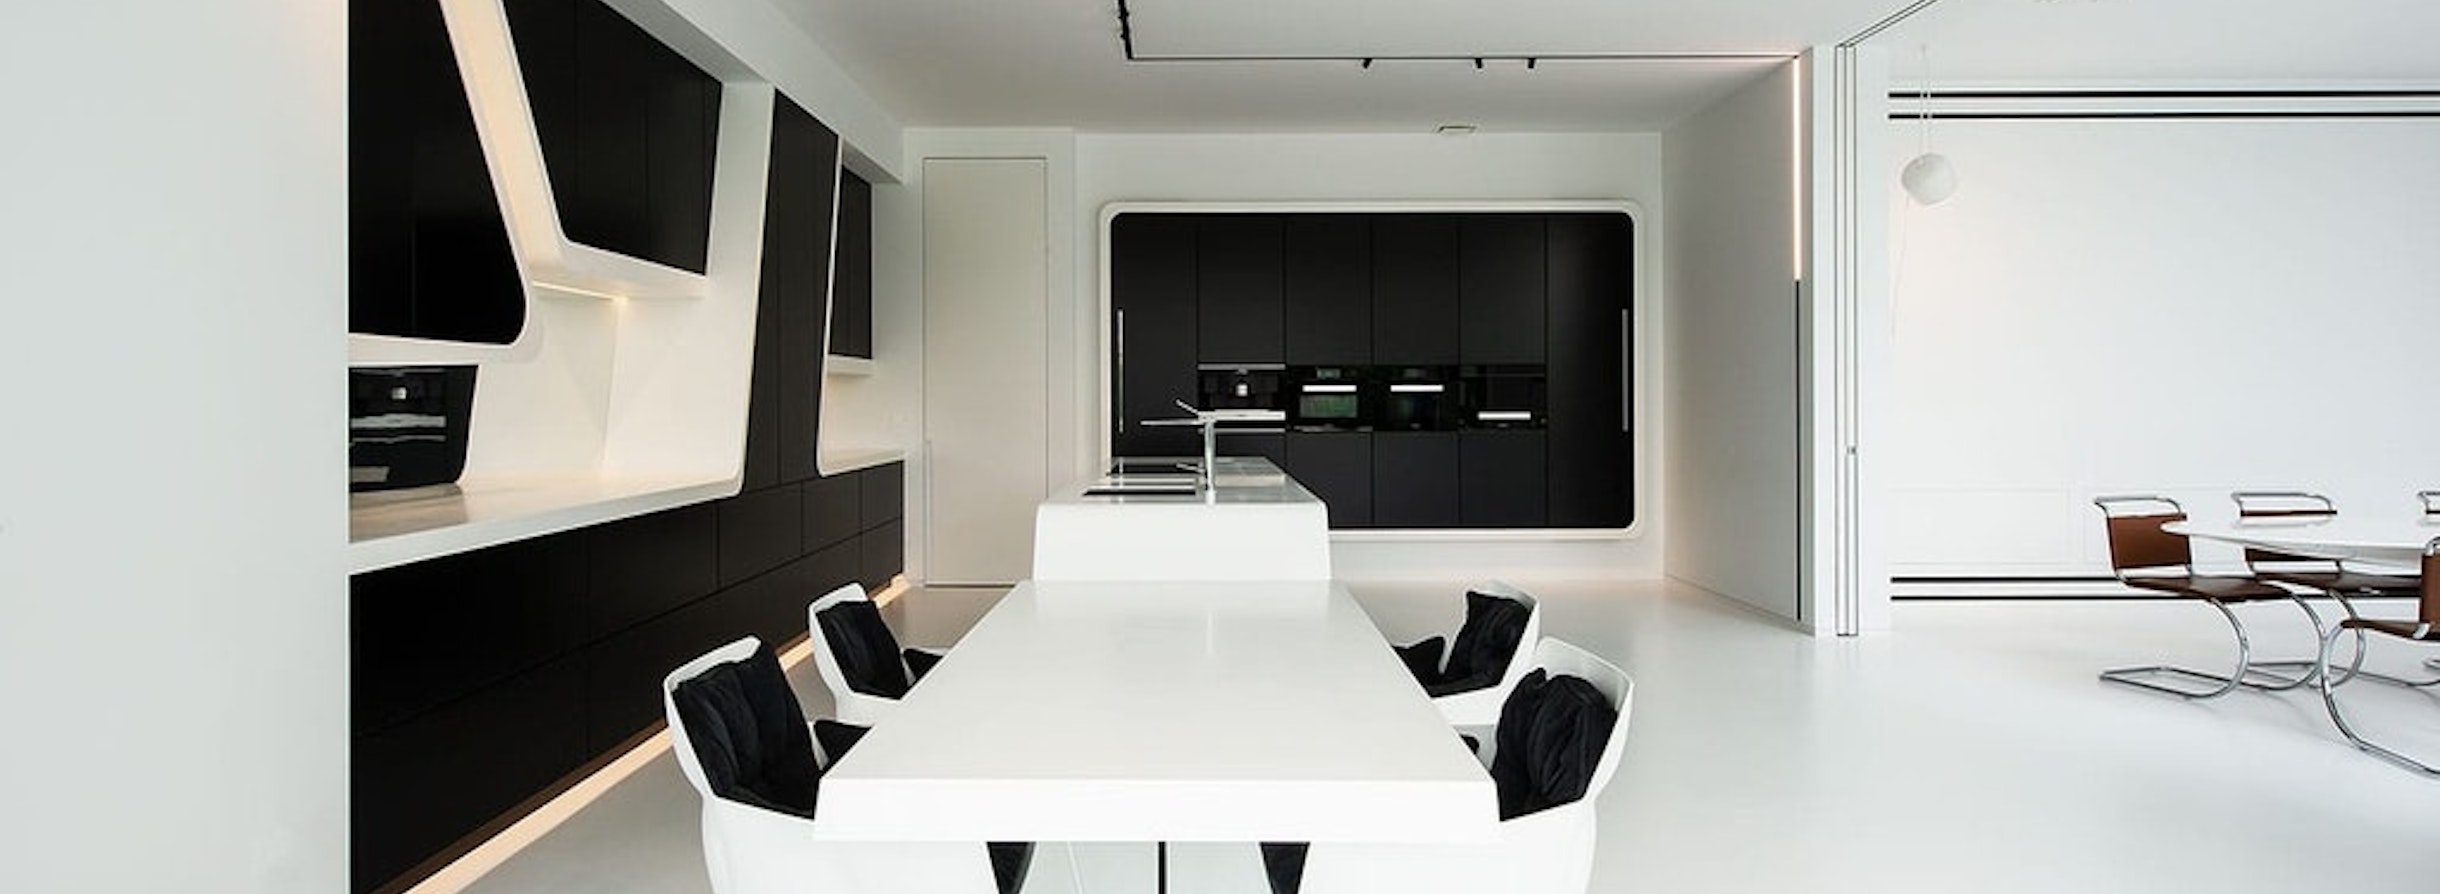 special-private-residence-belgium-flos-03-1440x840